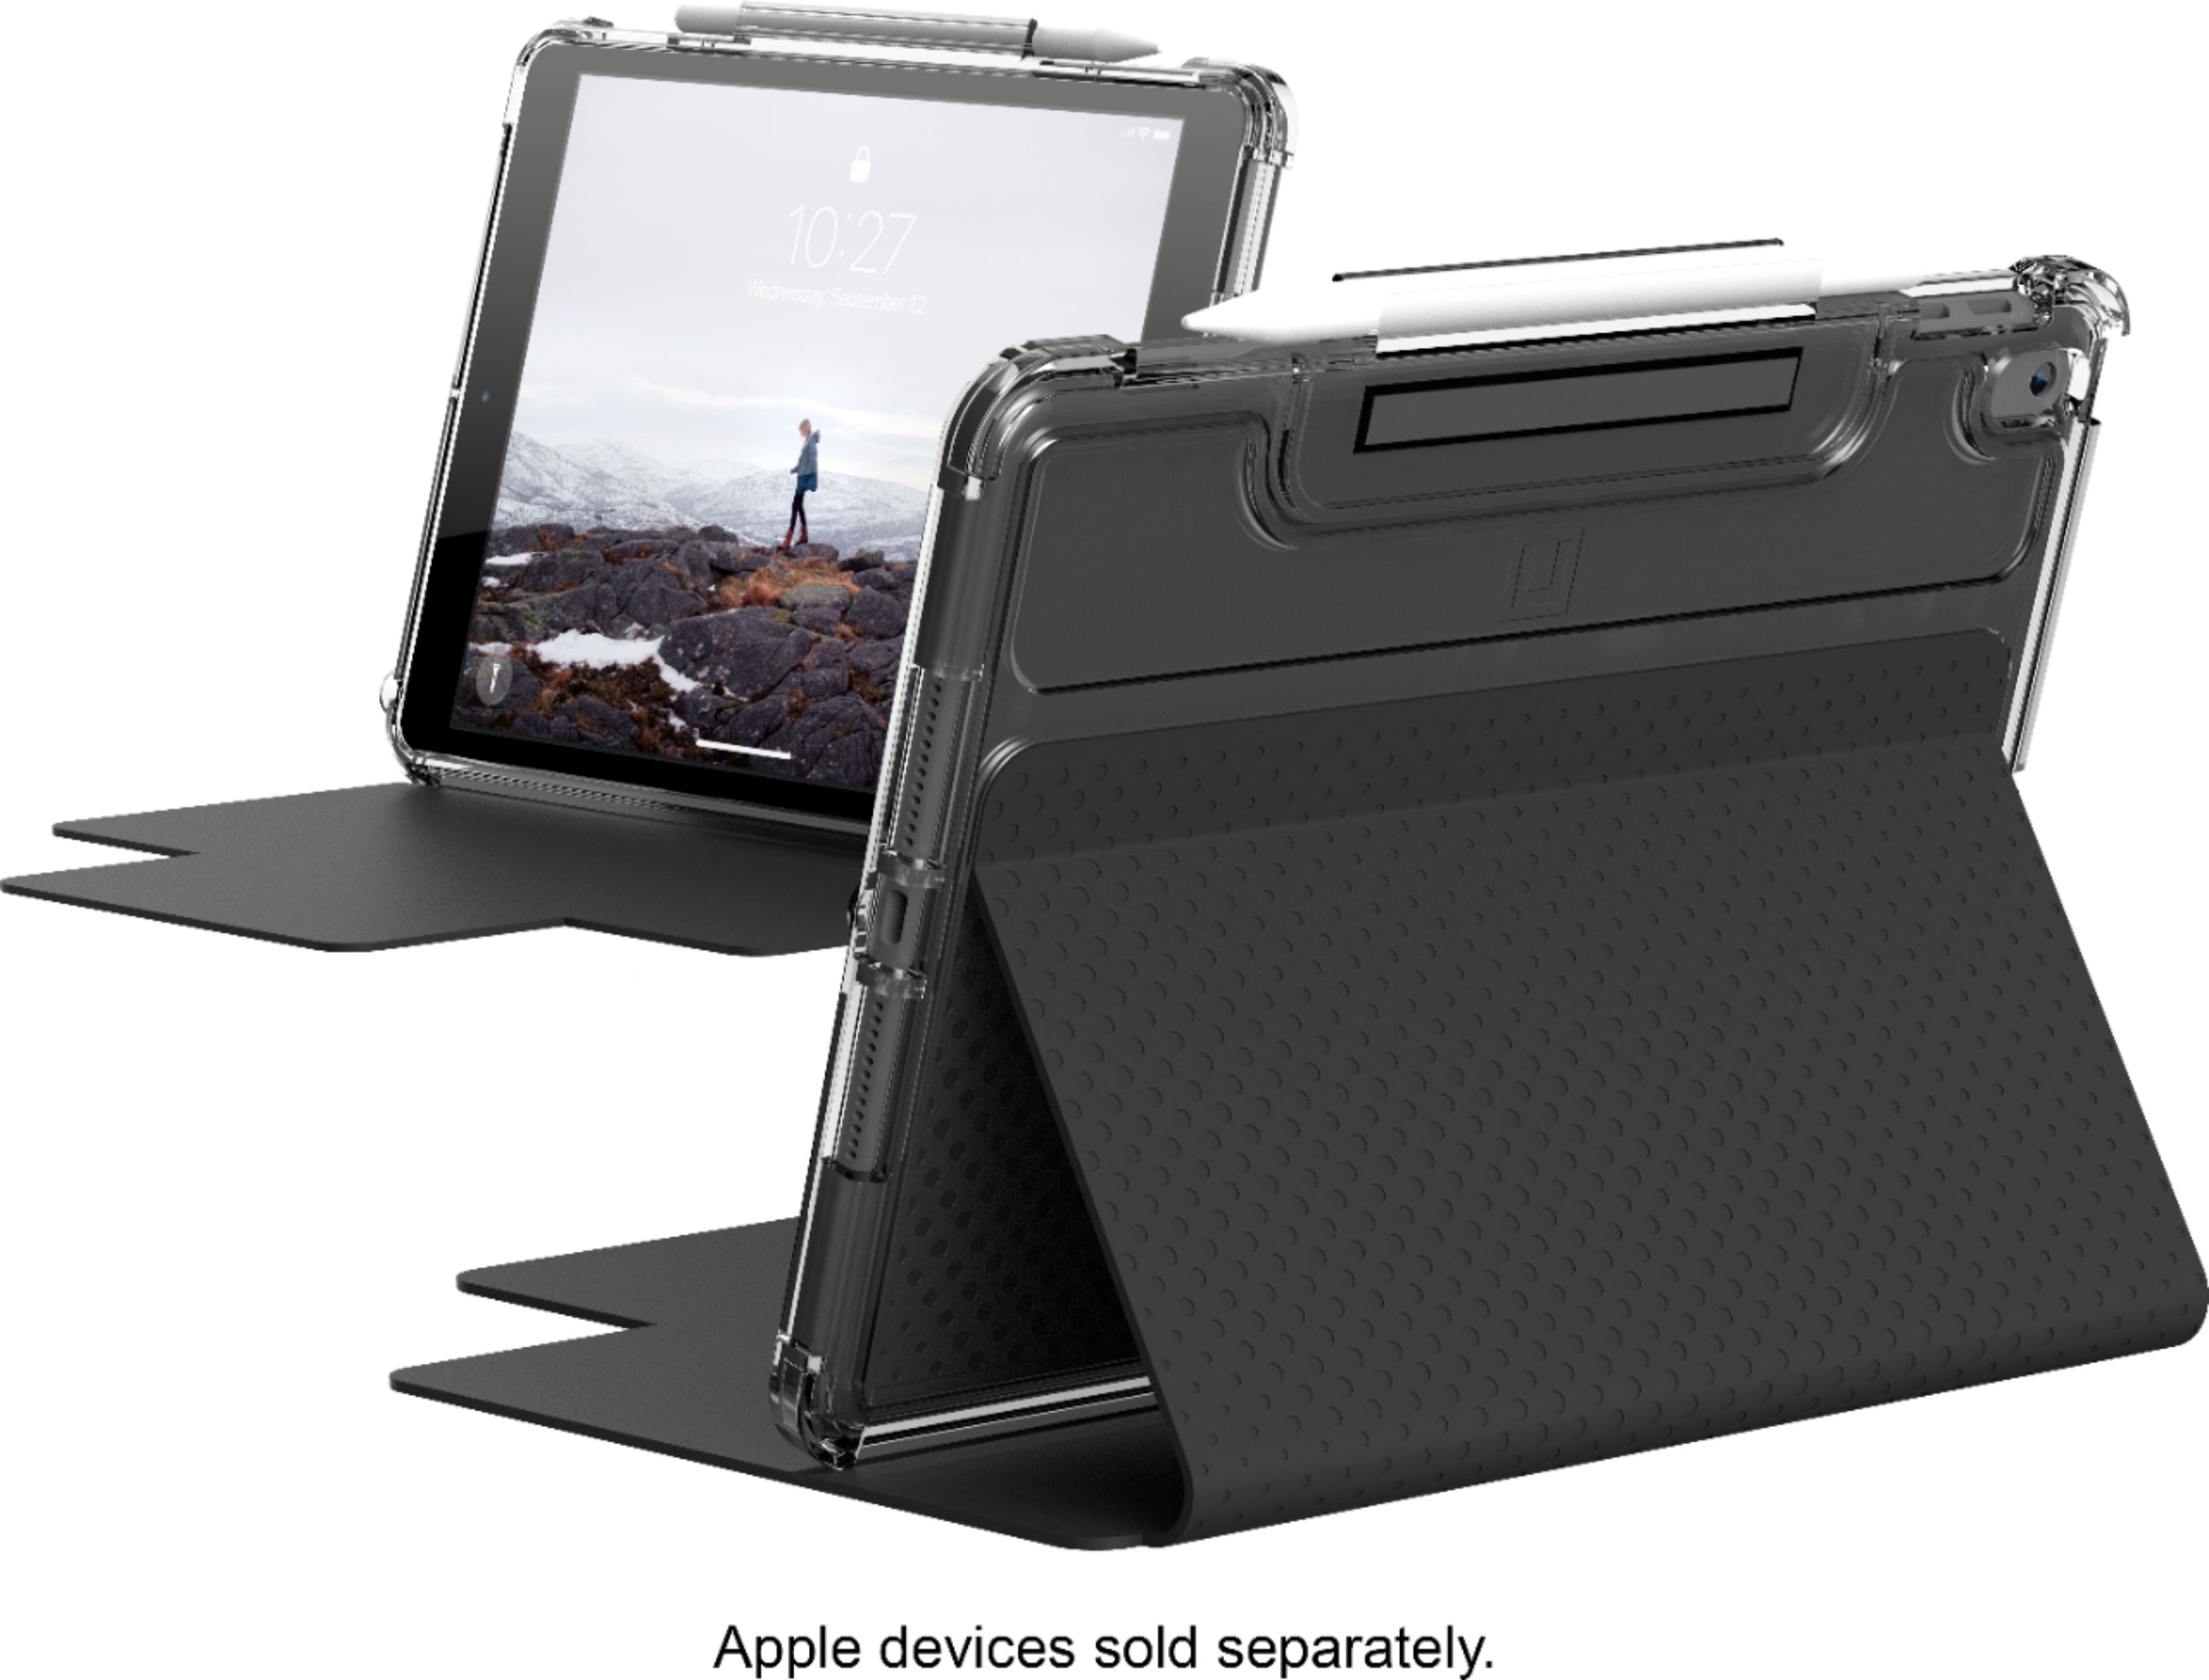 New Timecity Case for iPad Pro 12.9 5th Generation 2021, iPad Pro 12.9 4th/ 3rd Generation Case 2020/ 2018 with Built-in Screen Protector/ 360 Degree